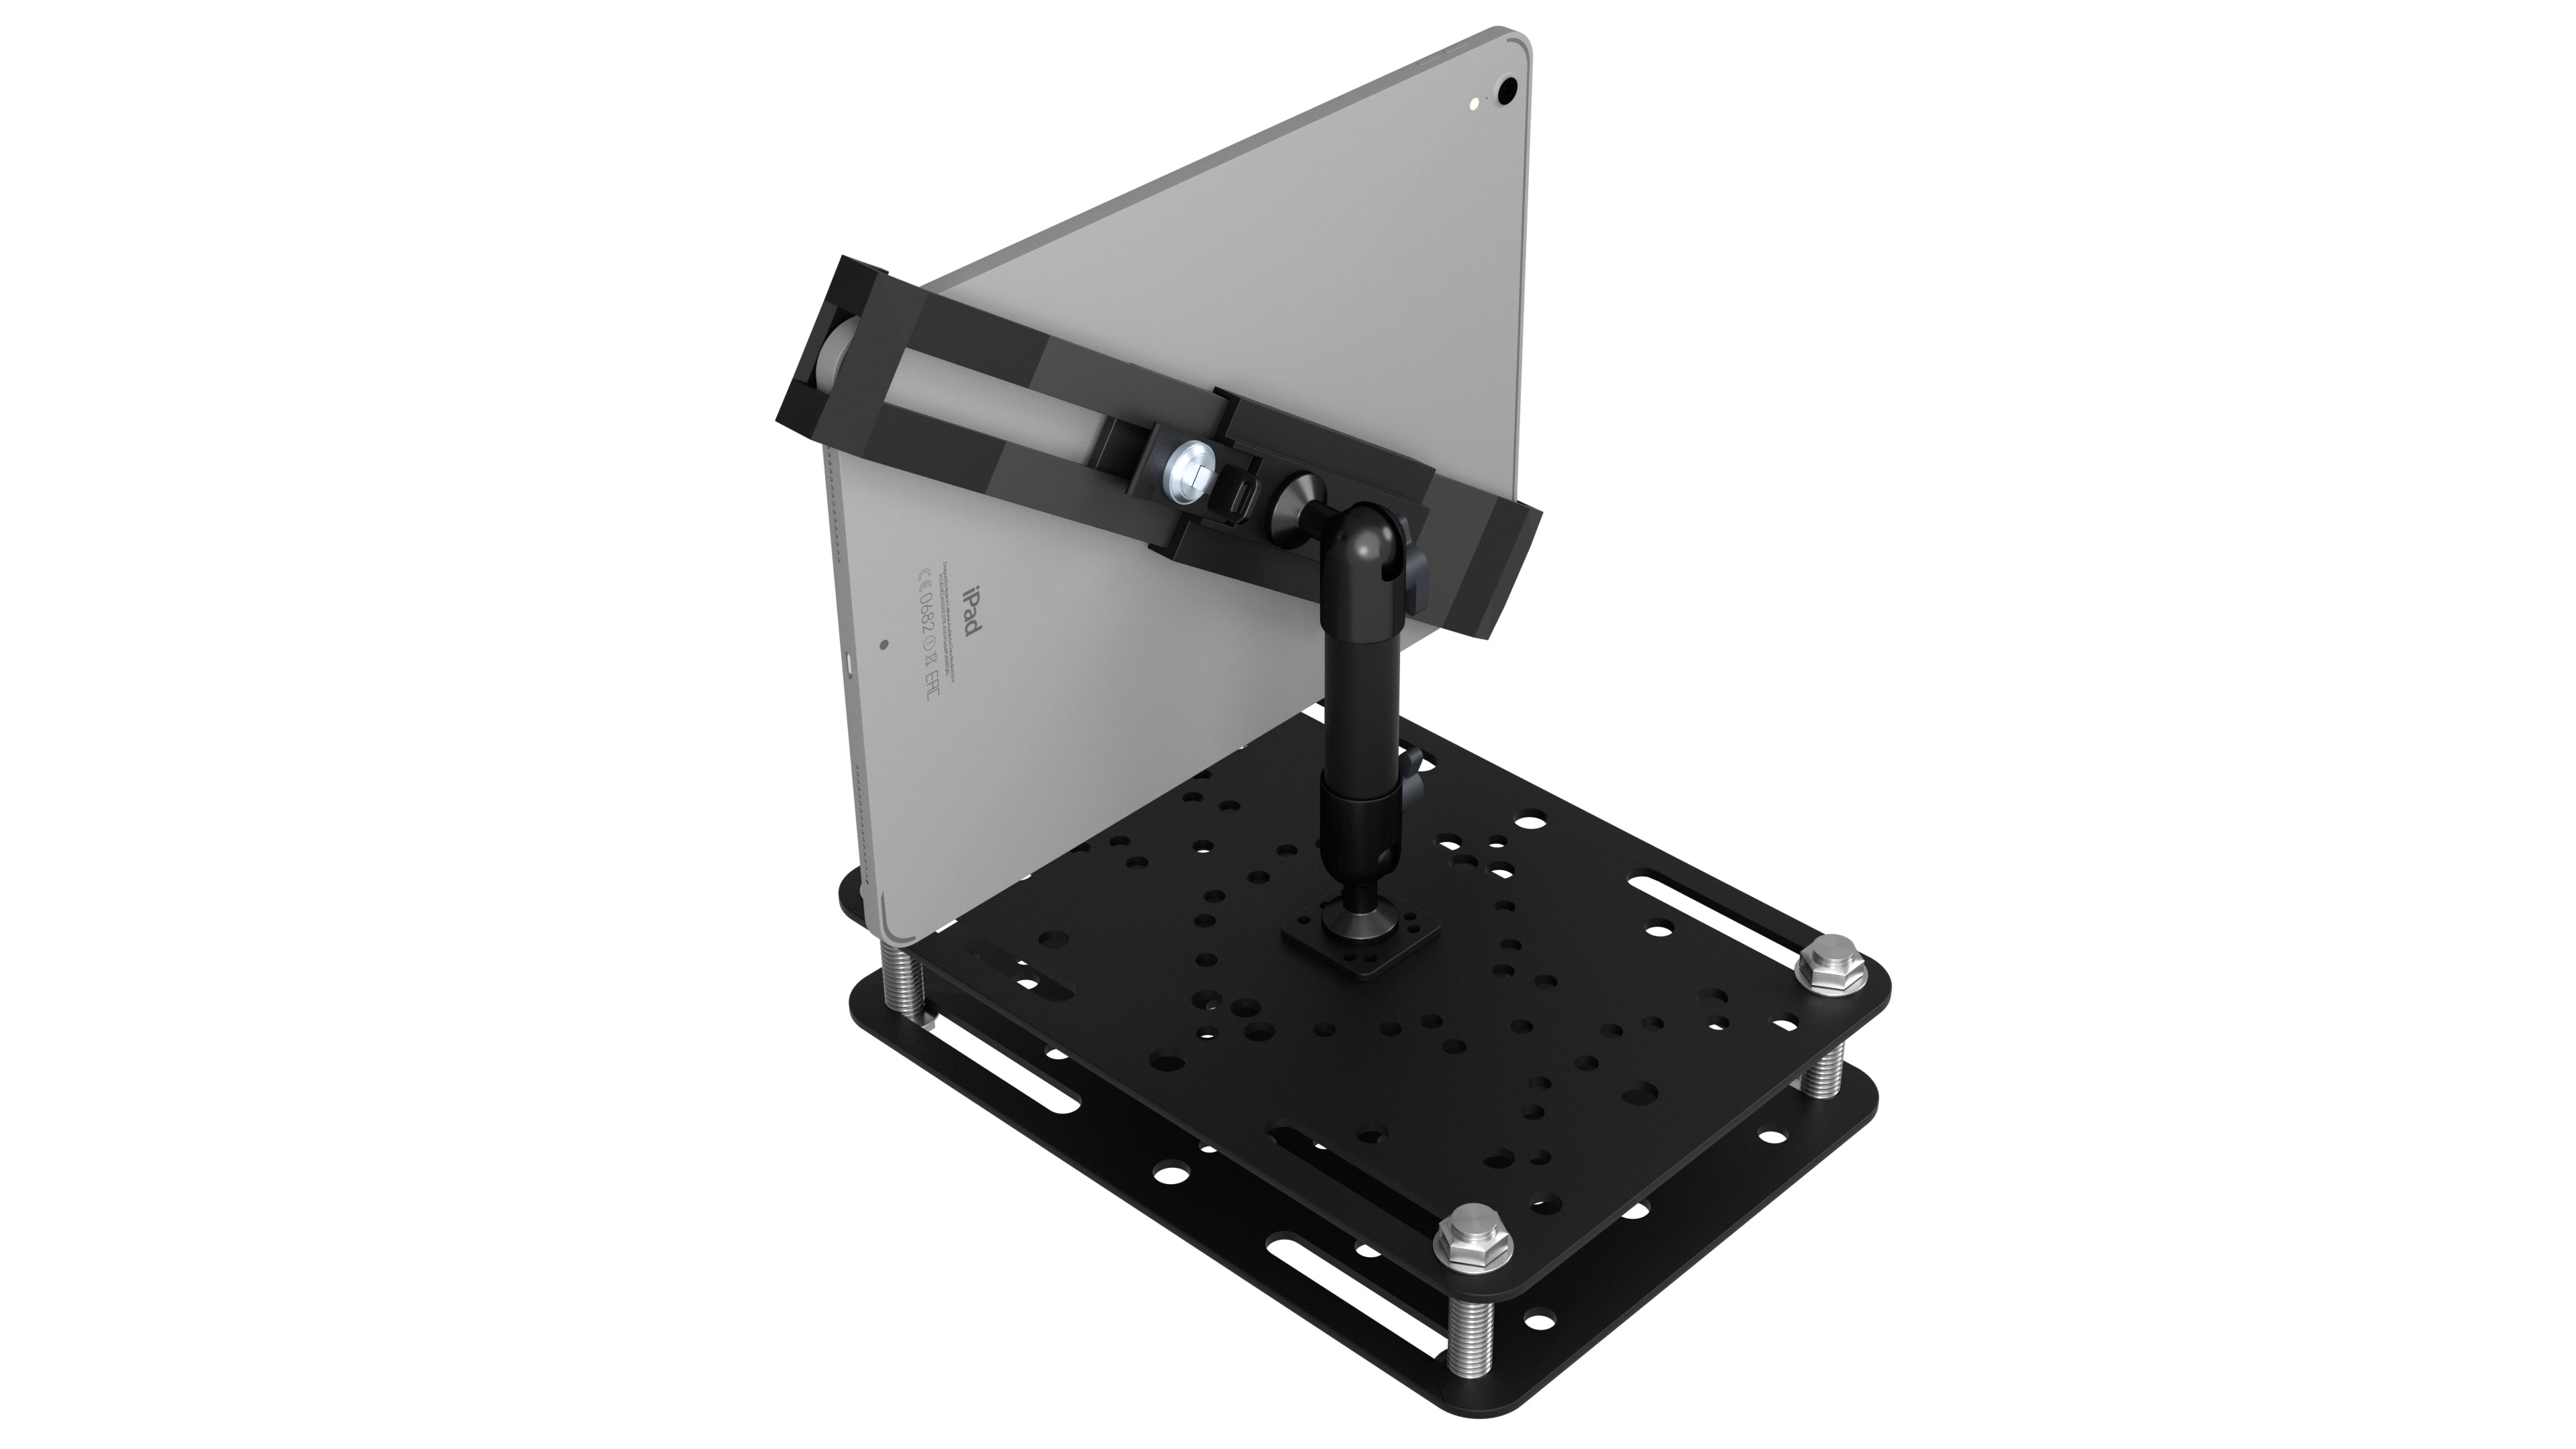 Tablet Security Forklift Mounting Kit with Universal Mounting Plates and Adjustable Holder